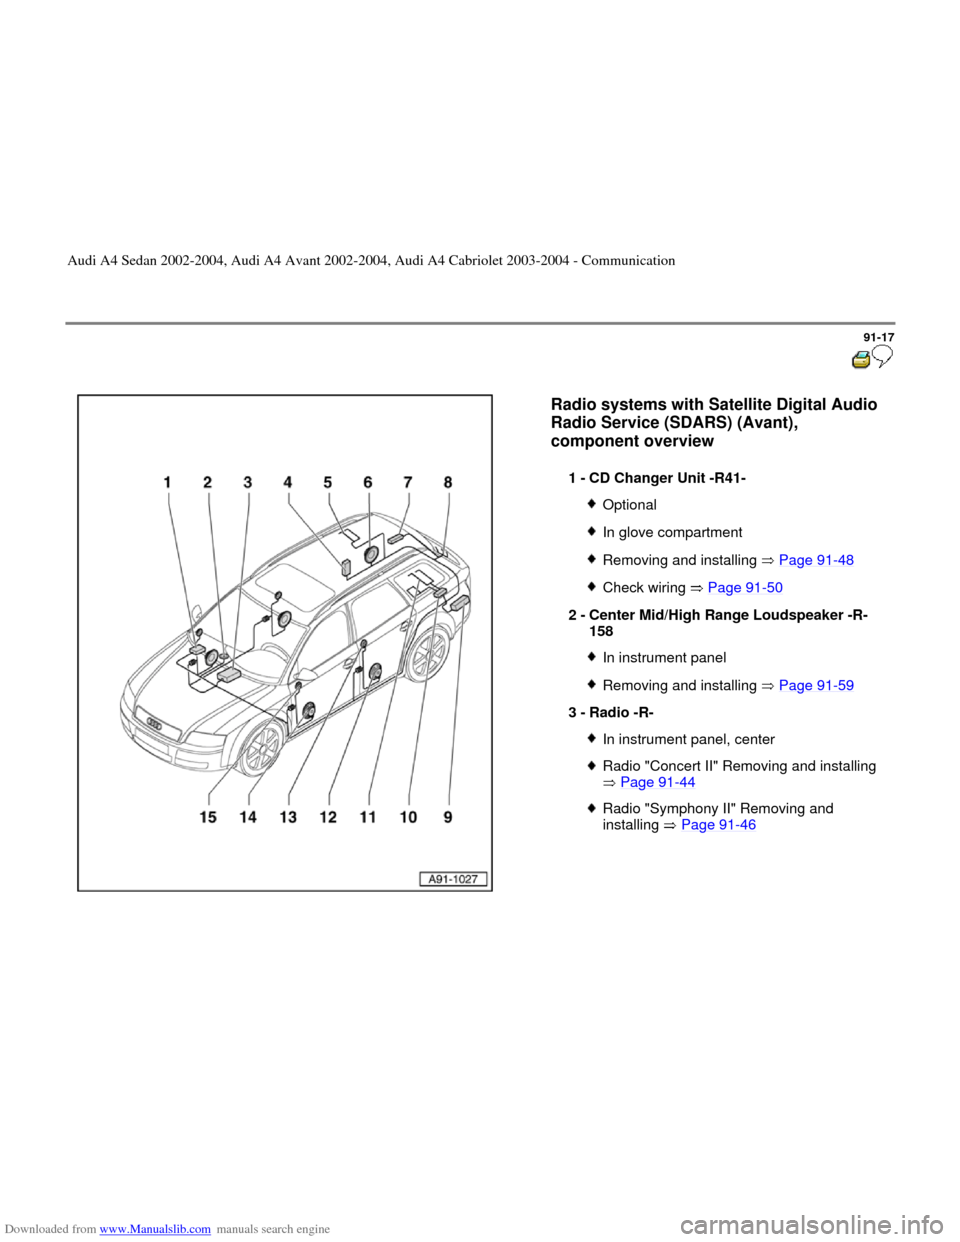 AUDI A4 2002 B5 / 1.G Radio System General Information Downloaded from www.Manualslib.com manuals search engine 91-17
 
  
Radio systems with Satellite Digital Audio 
Radio Service (SDARS) (Avant), 
component overview 
 
1 - 
CD Changer Unit -R41- 
Option